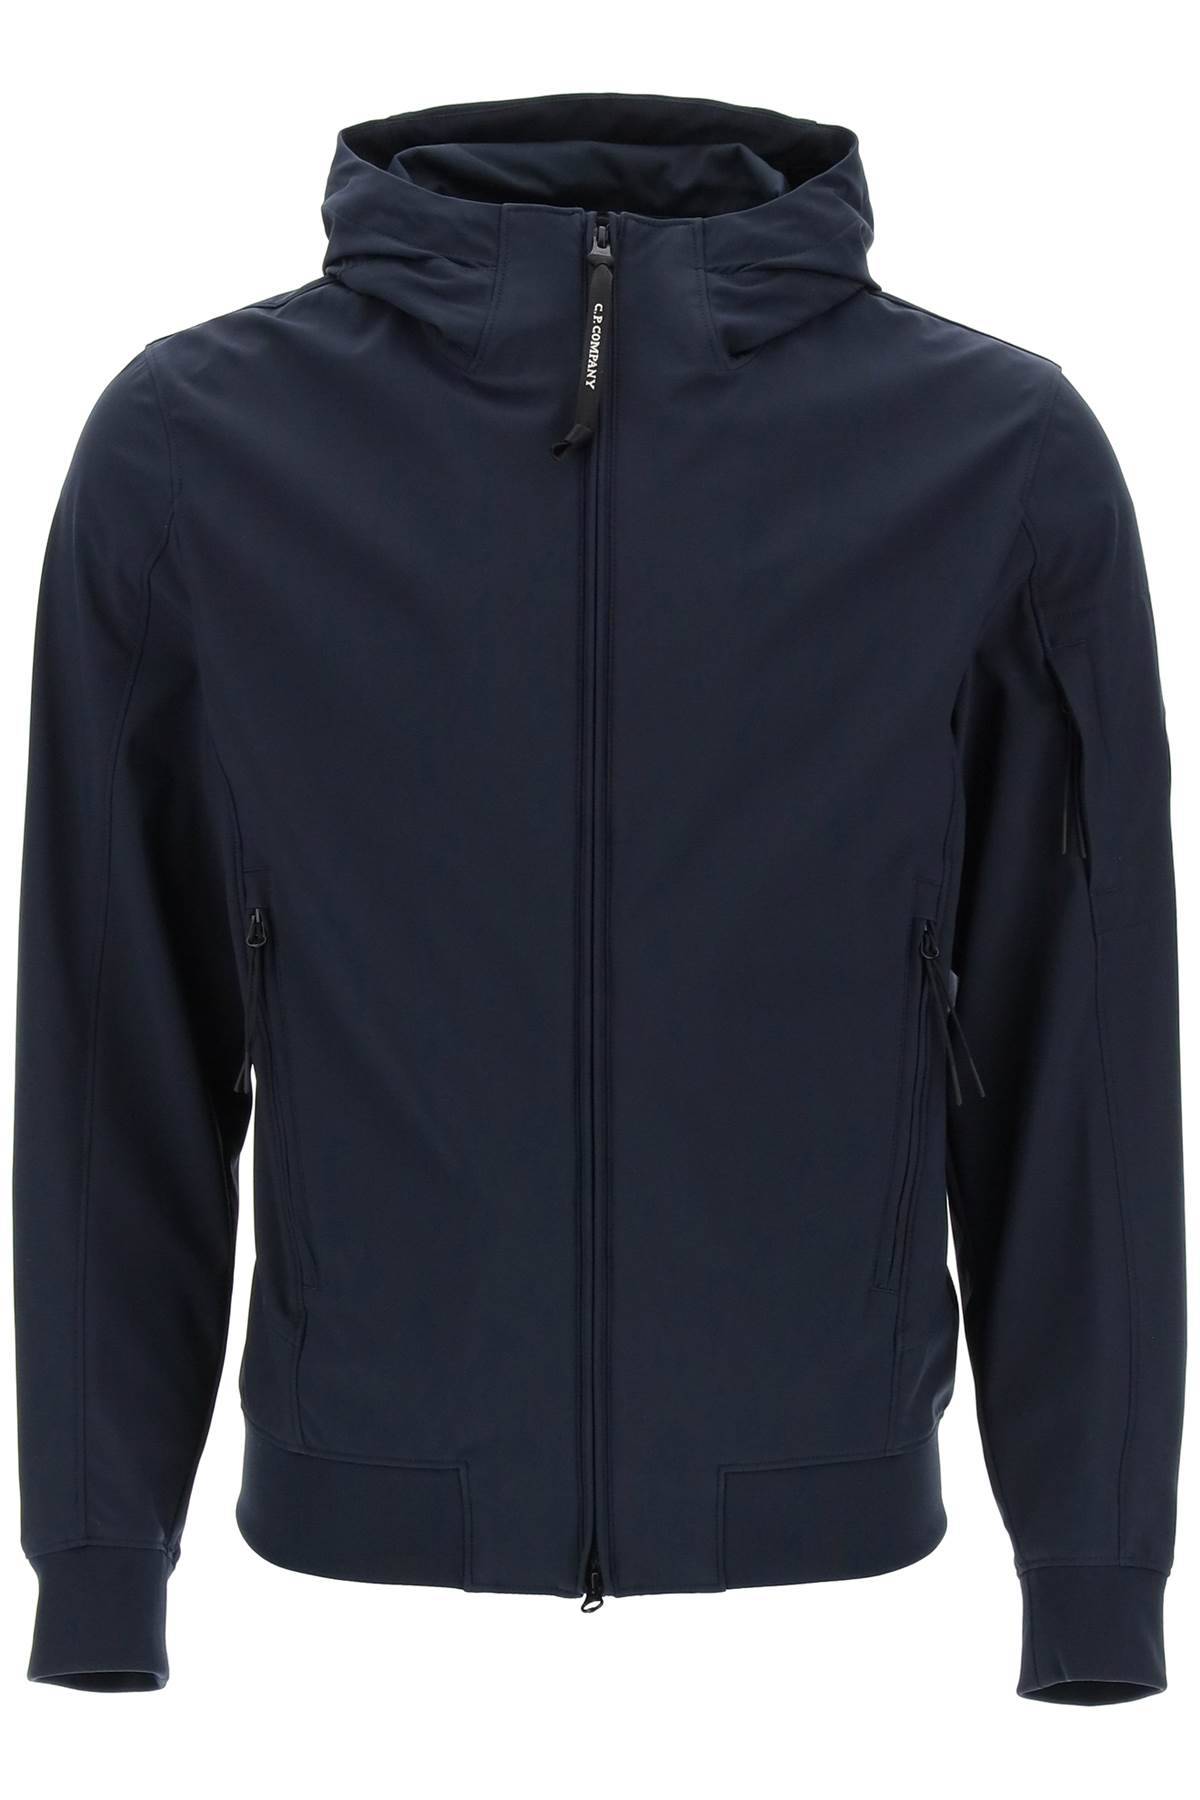 CP COMPANY CP COMPANY hooded jacket in c. p. shell-r